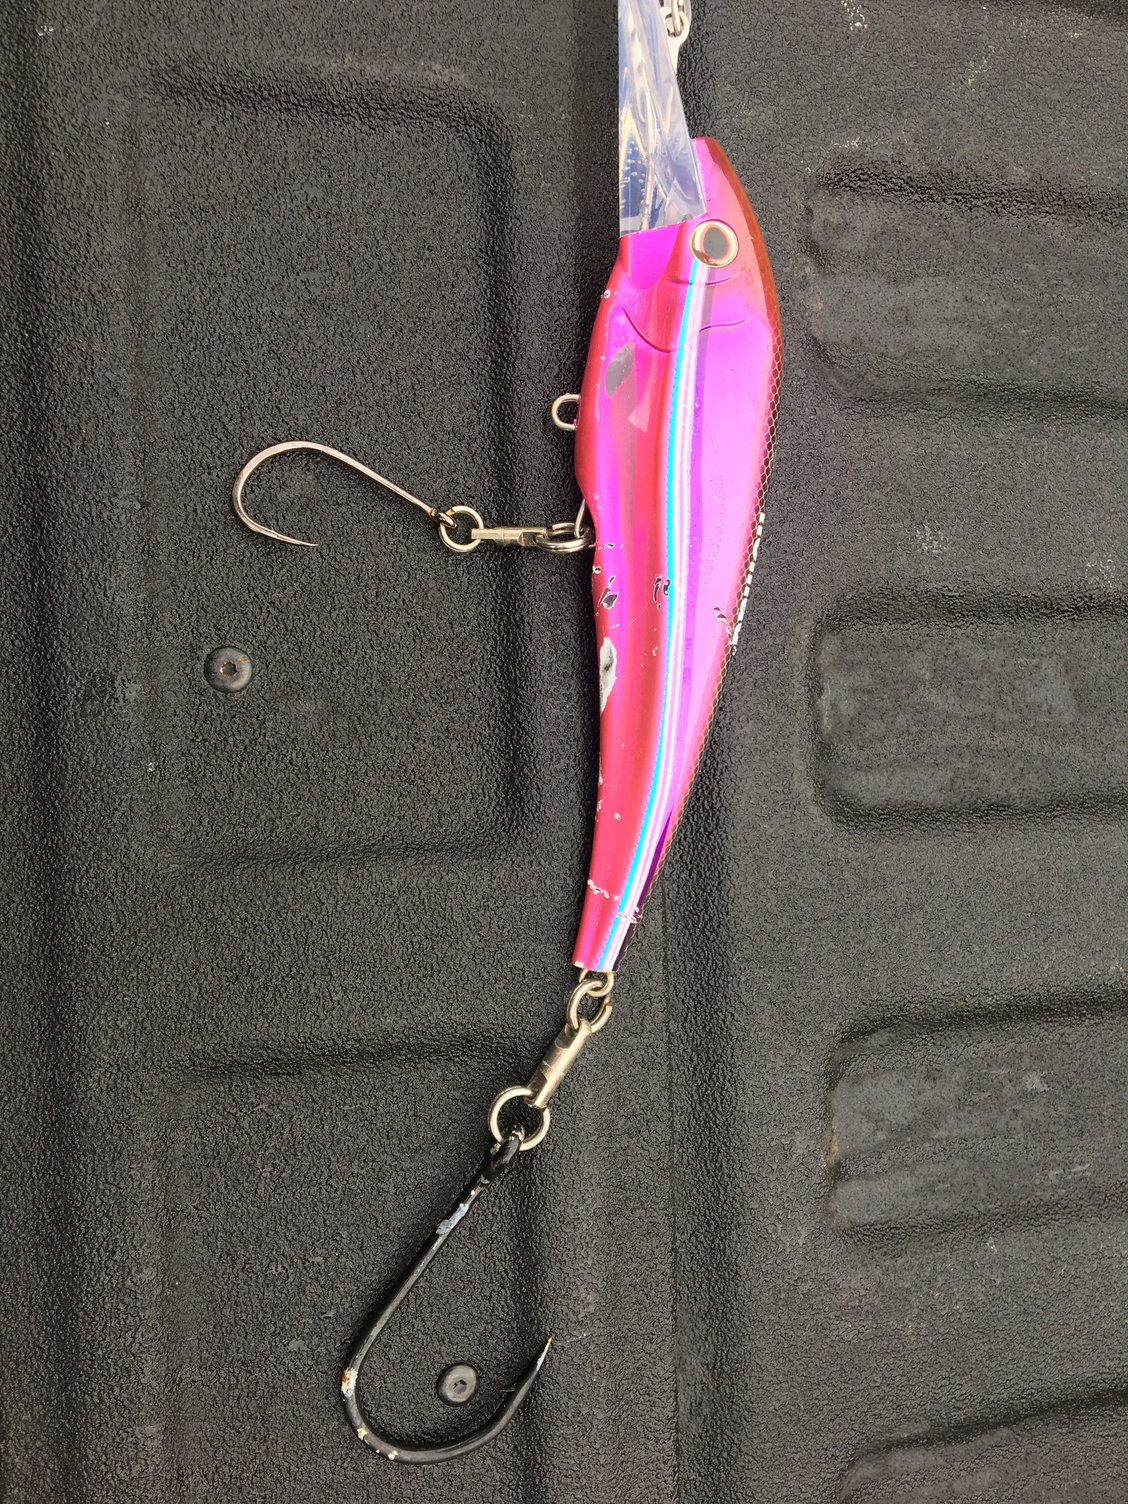 Nomad dtx 200 minow hook replacement - The Hull Truth - Boating and Fishing  Forum